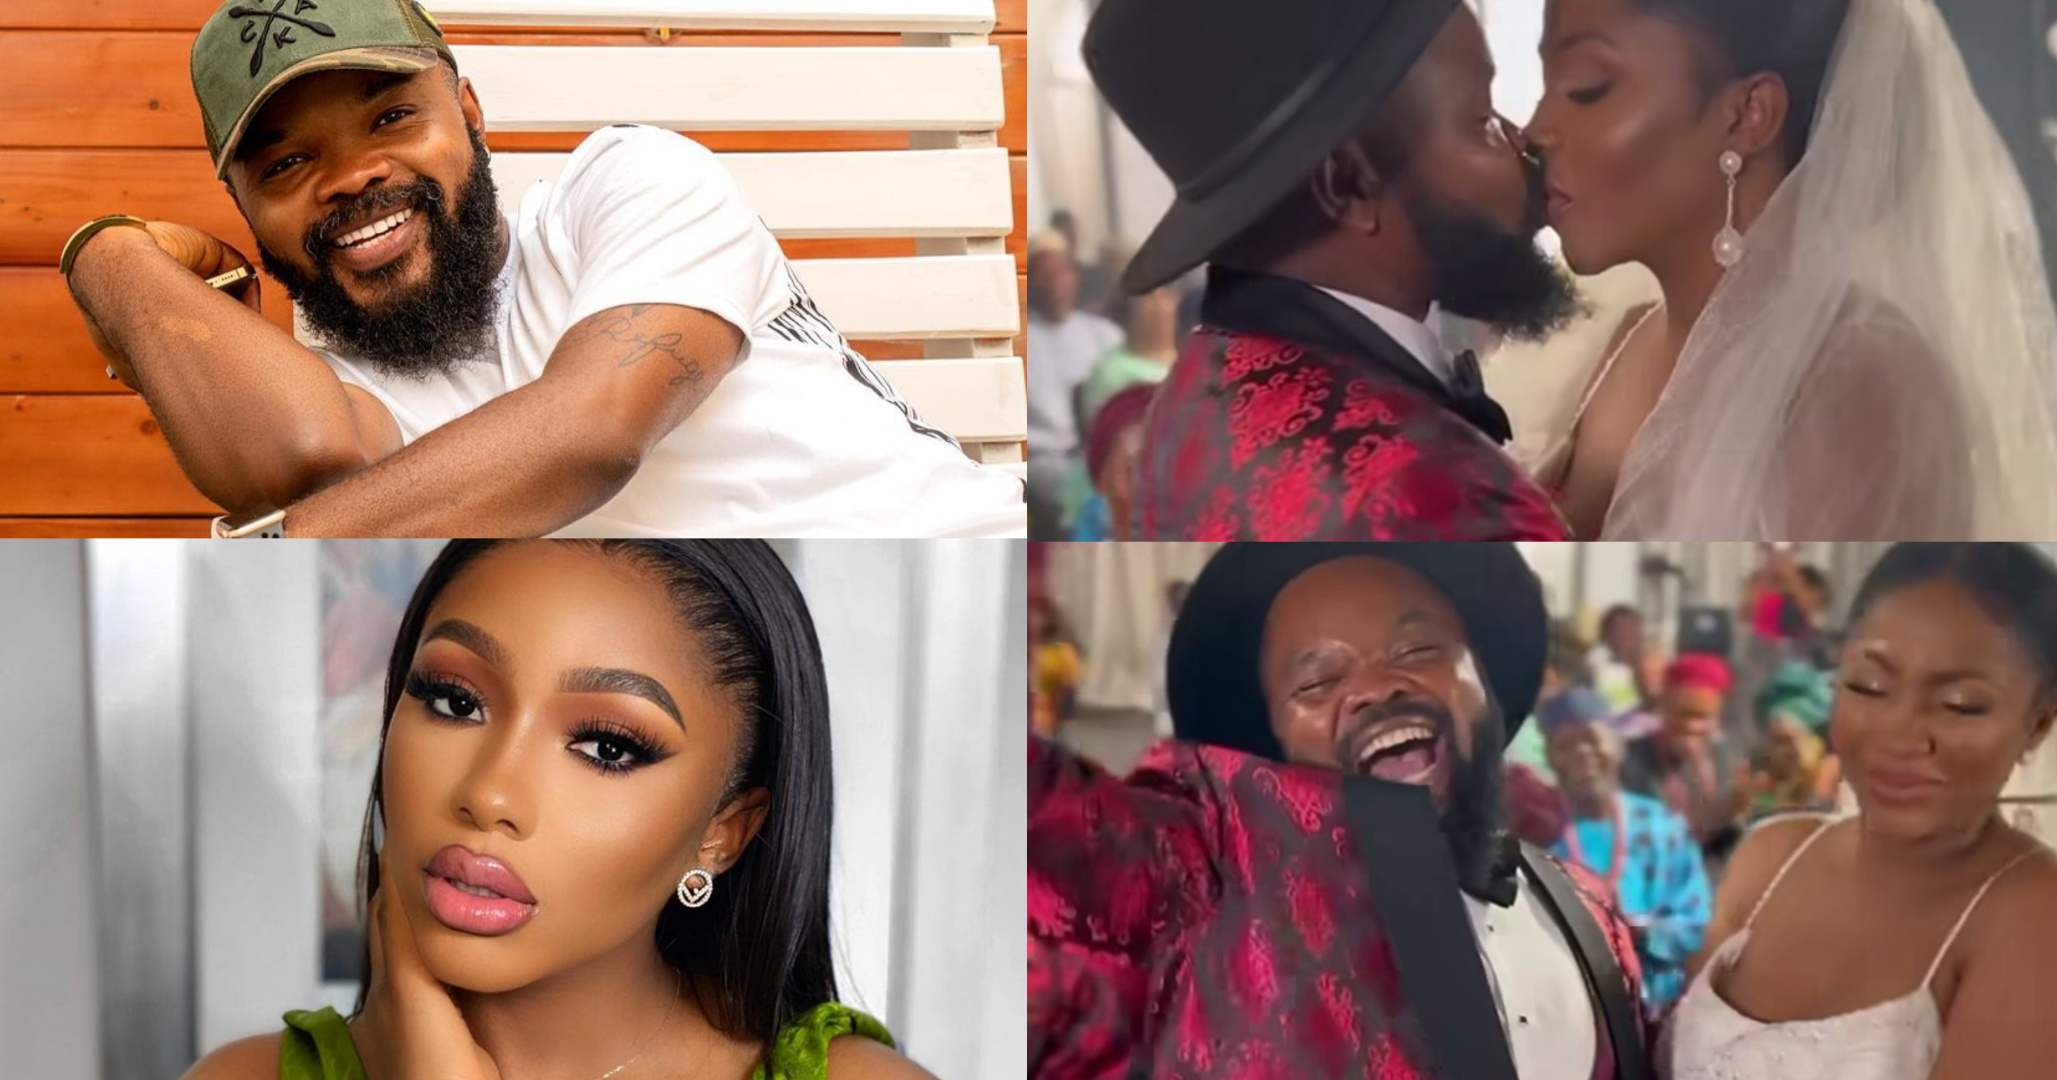 "Why she keep face like that?" – Reactions trail video of Mercy Eke and Nedu Wazobia sharing kiss